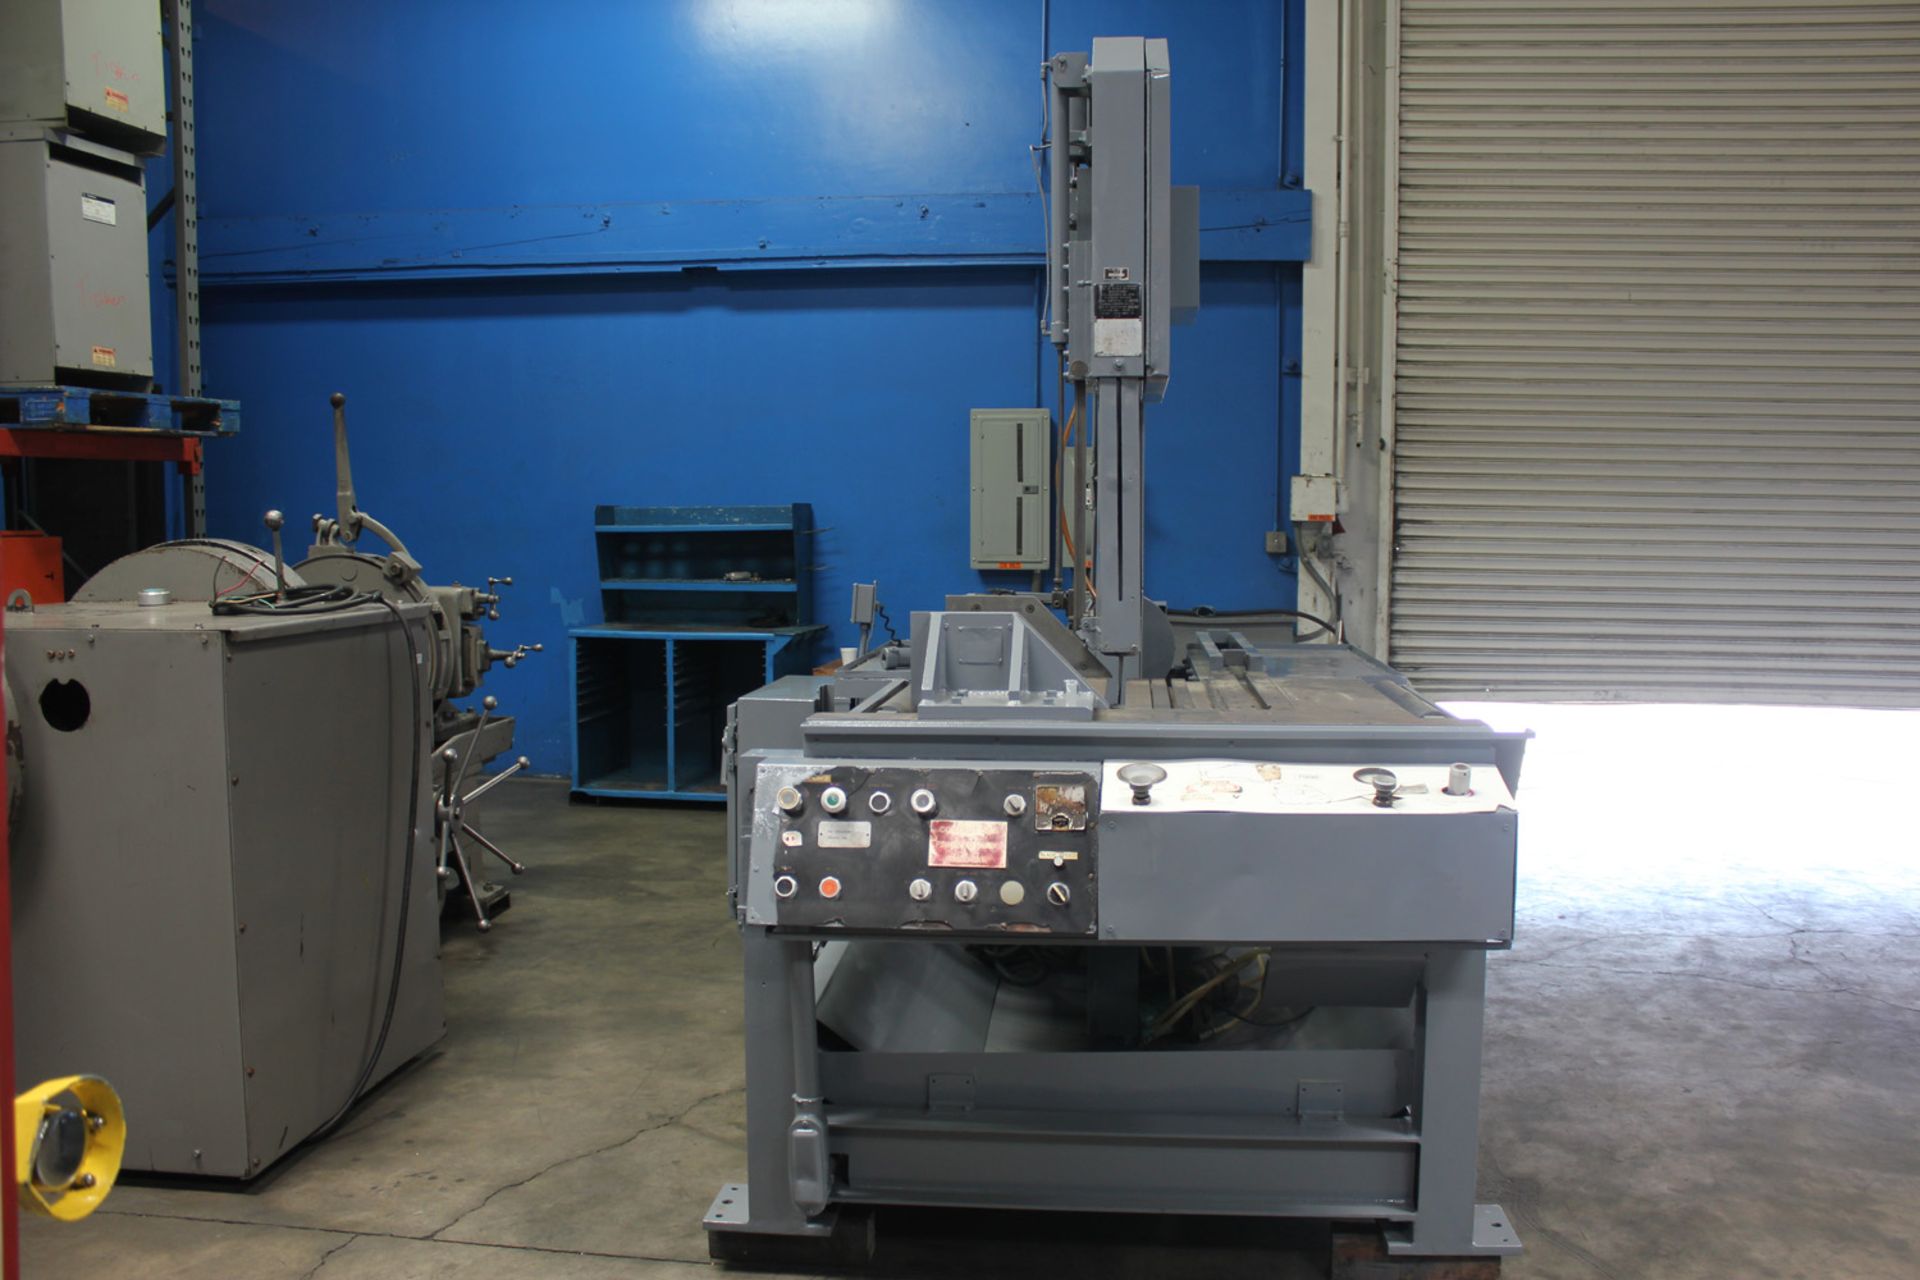 21" Throat Kalamazoo Auto Vertical Metal Cutting Bandsaw Tilt Frame VTH-21S - Located In: Huntington - Image 5 of 12